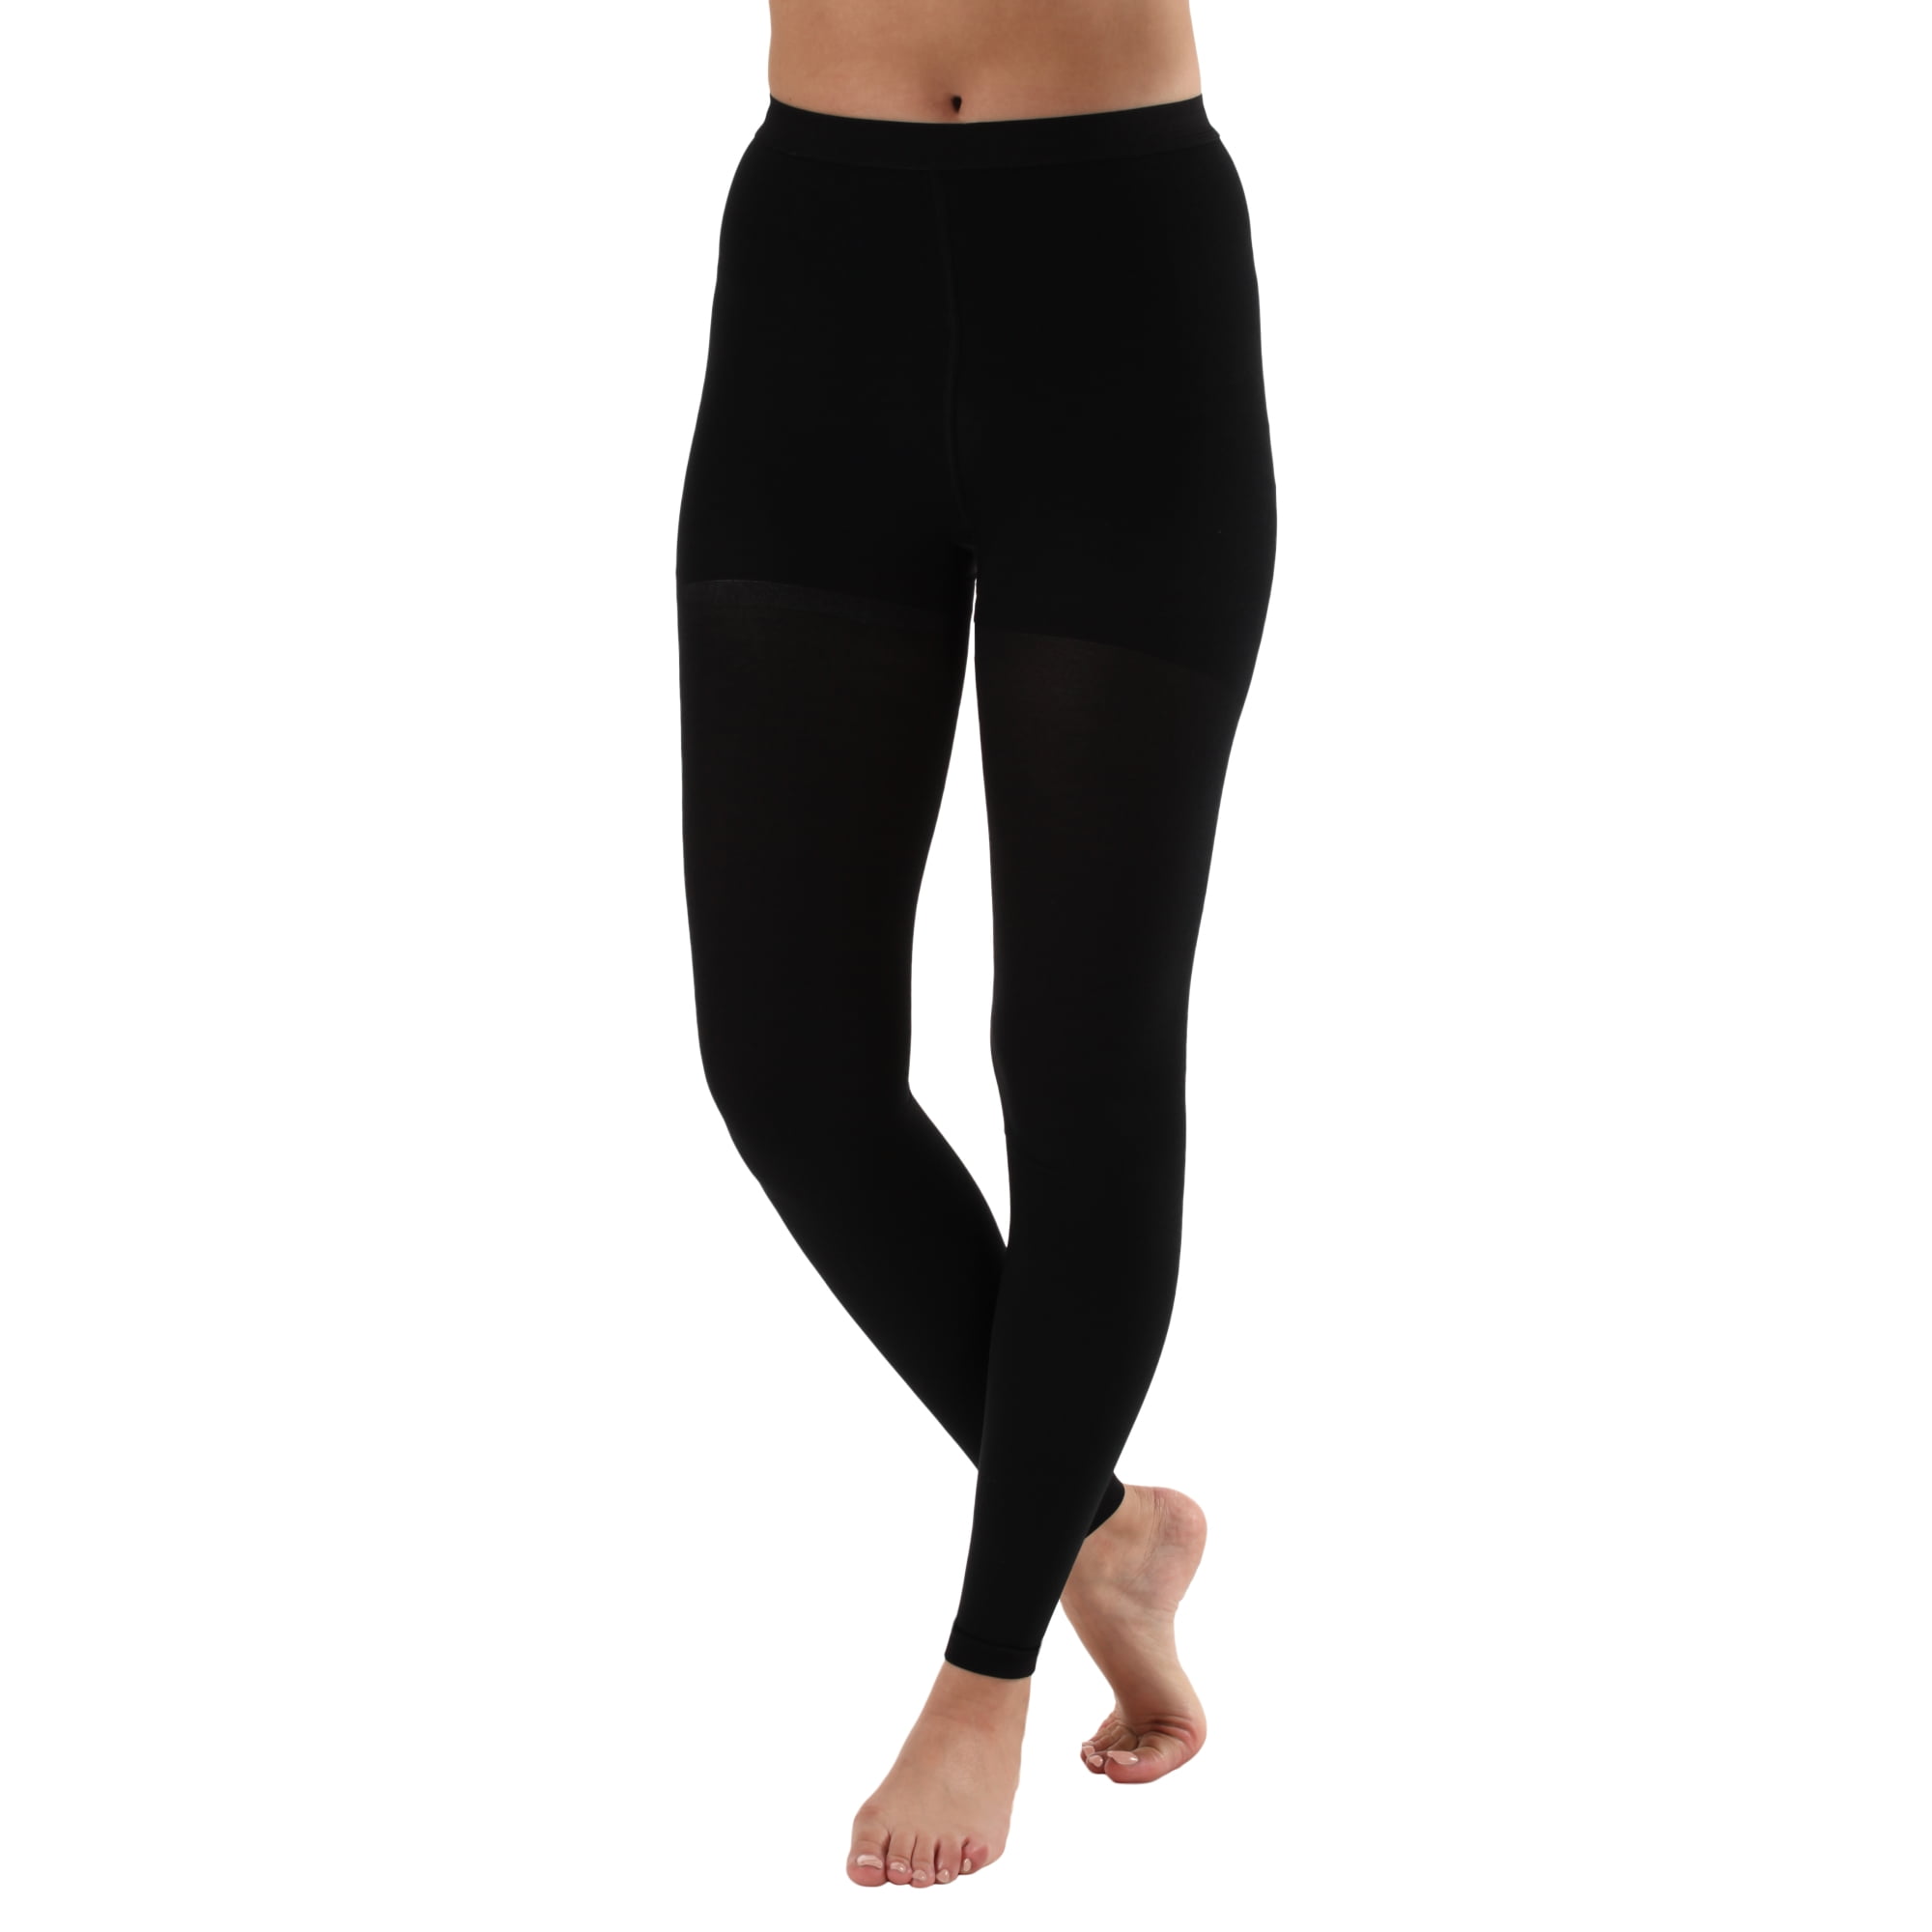 Compression Leggings For Circulation Plus Sizewise